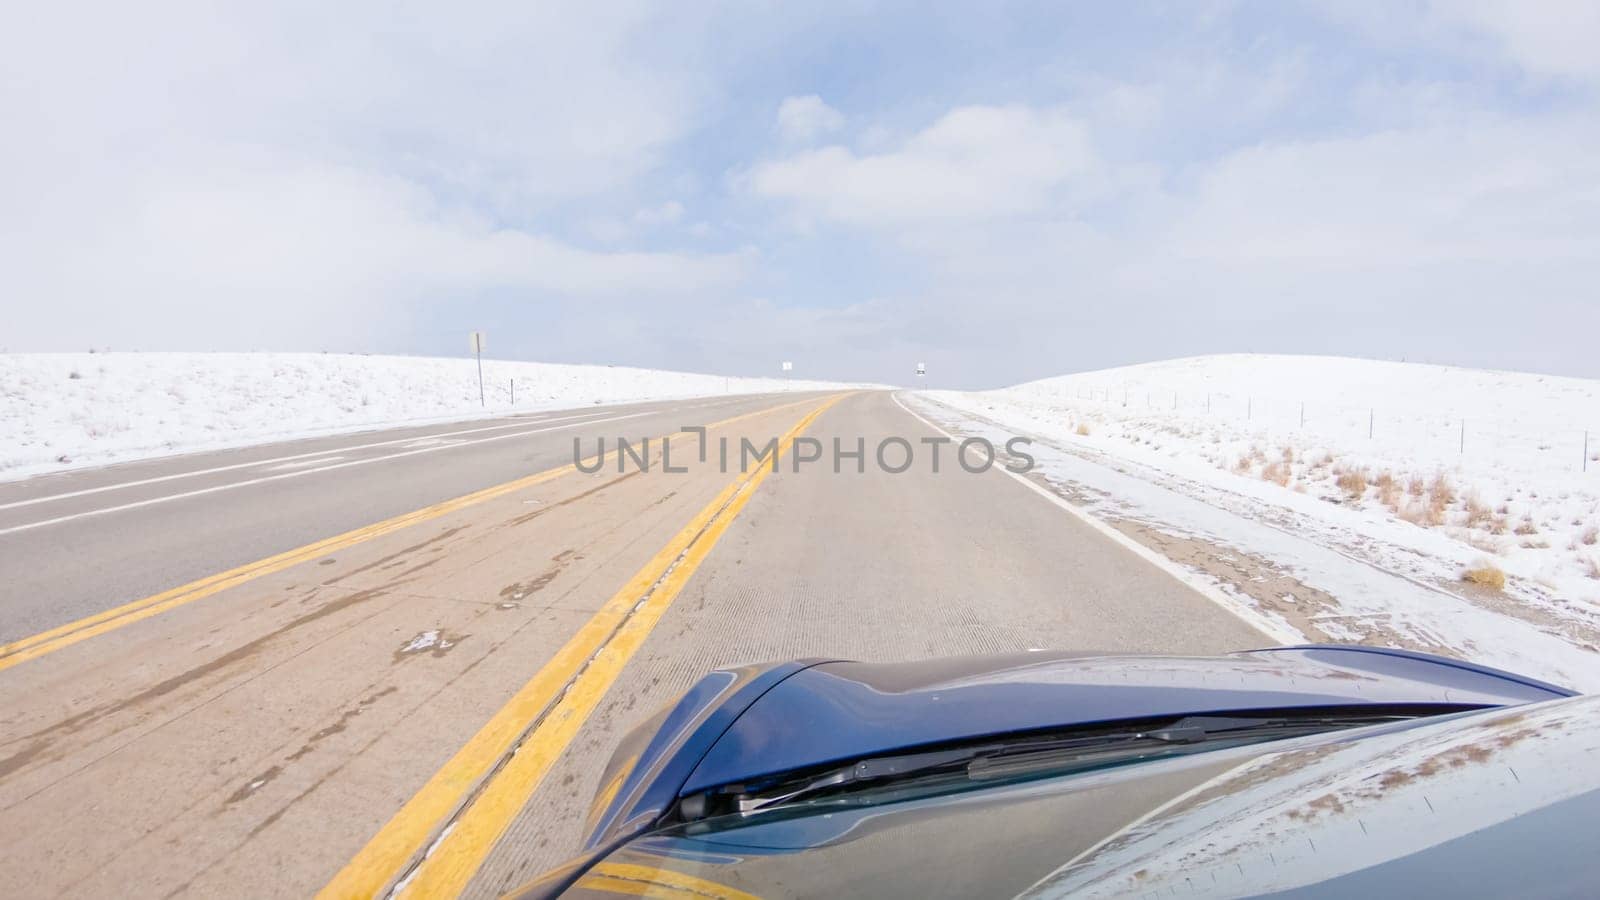 Driving on Suburban Road Post-Winter Storm by arinahabich